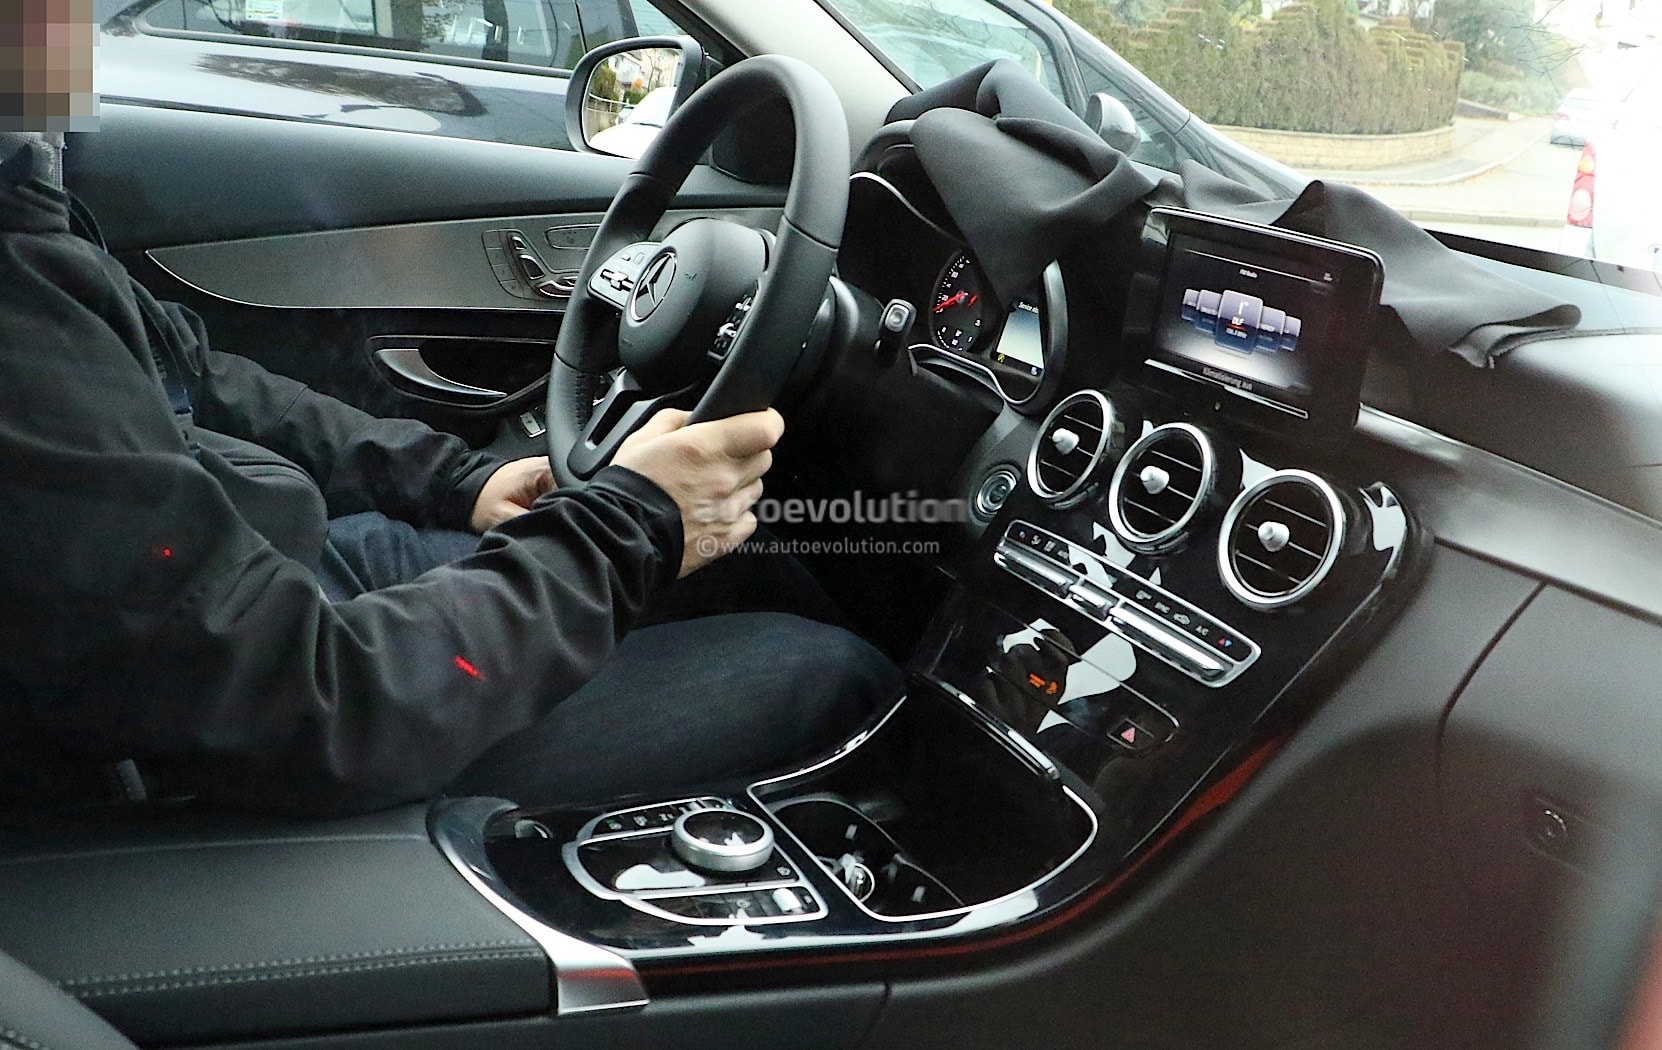 2018 Mercedes Benz C Class Facelift Shows Interior For The